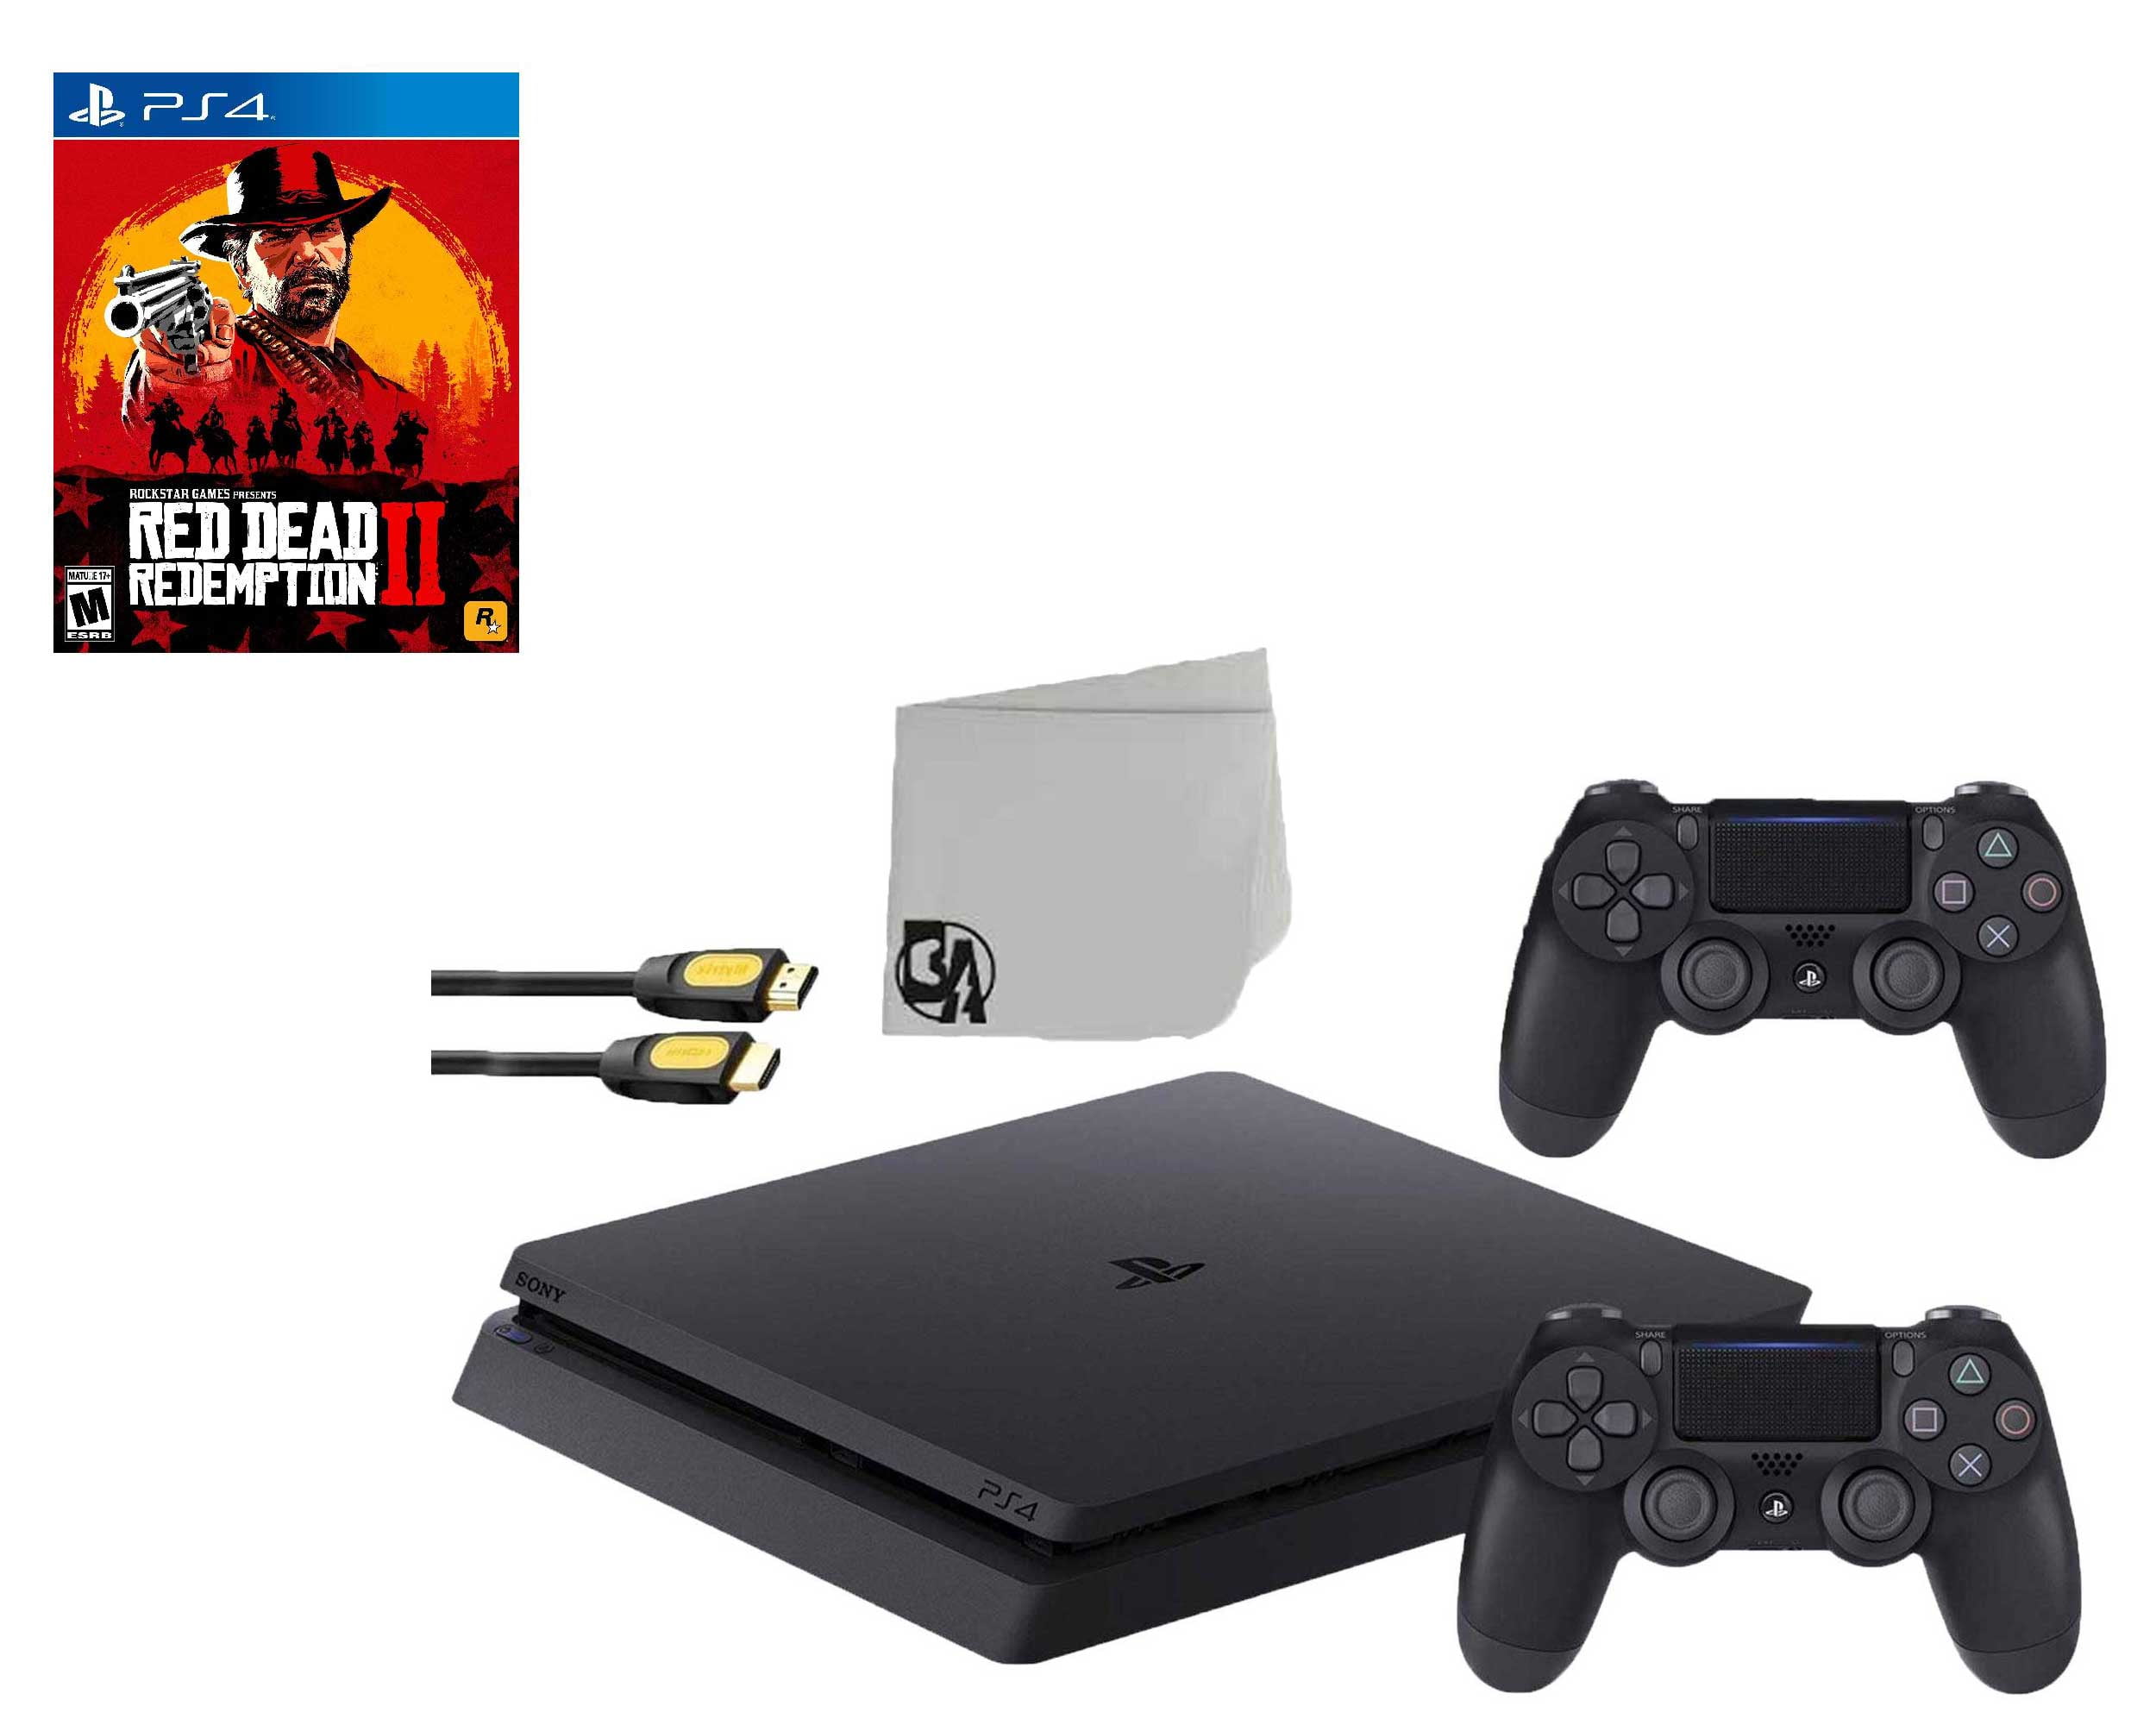 Sony 2215A PlayStation 4 Slim 500GB Black 2 Controller Included with Read Dead Redemption 2 Game BOLT AXTION Bundle Lke New Walmart.com